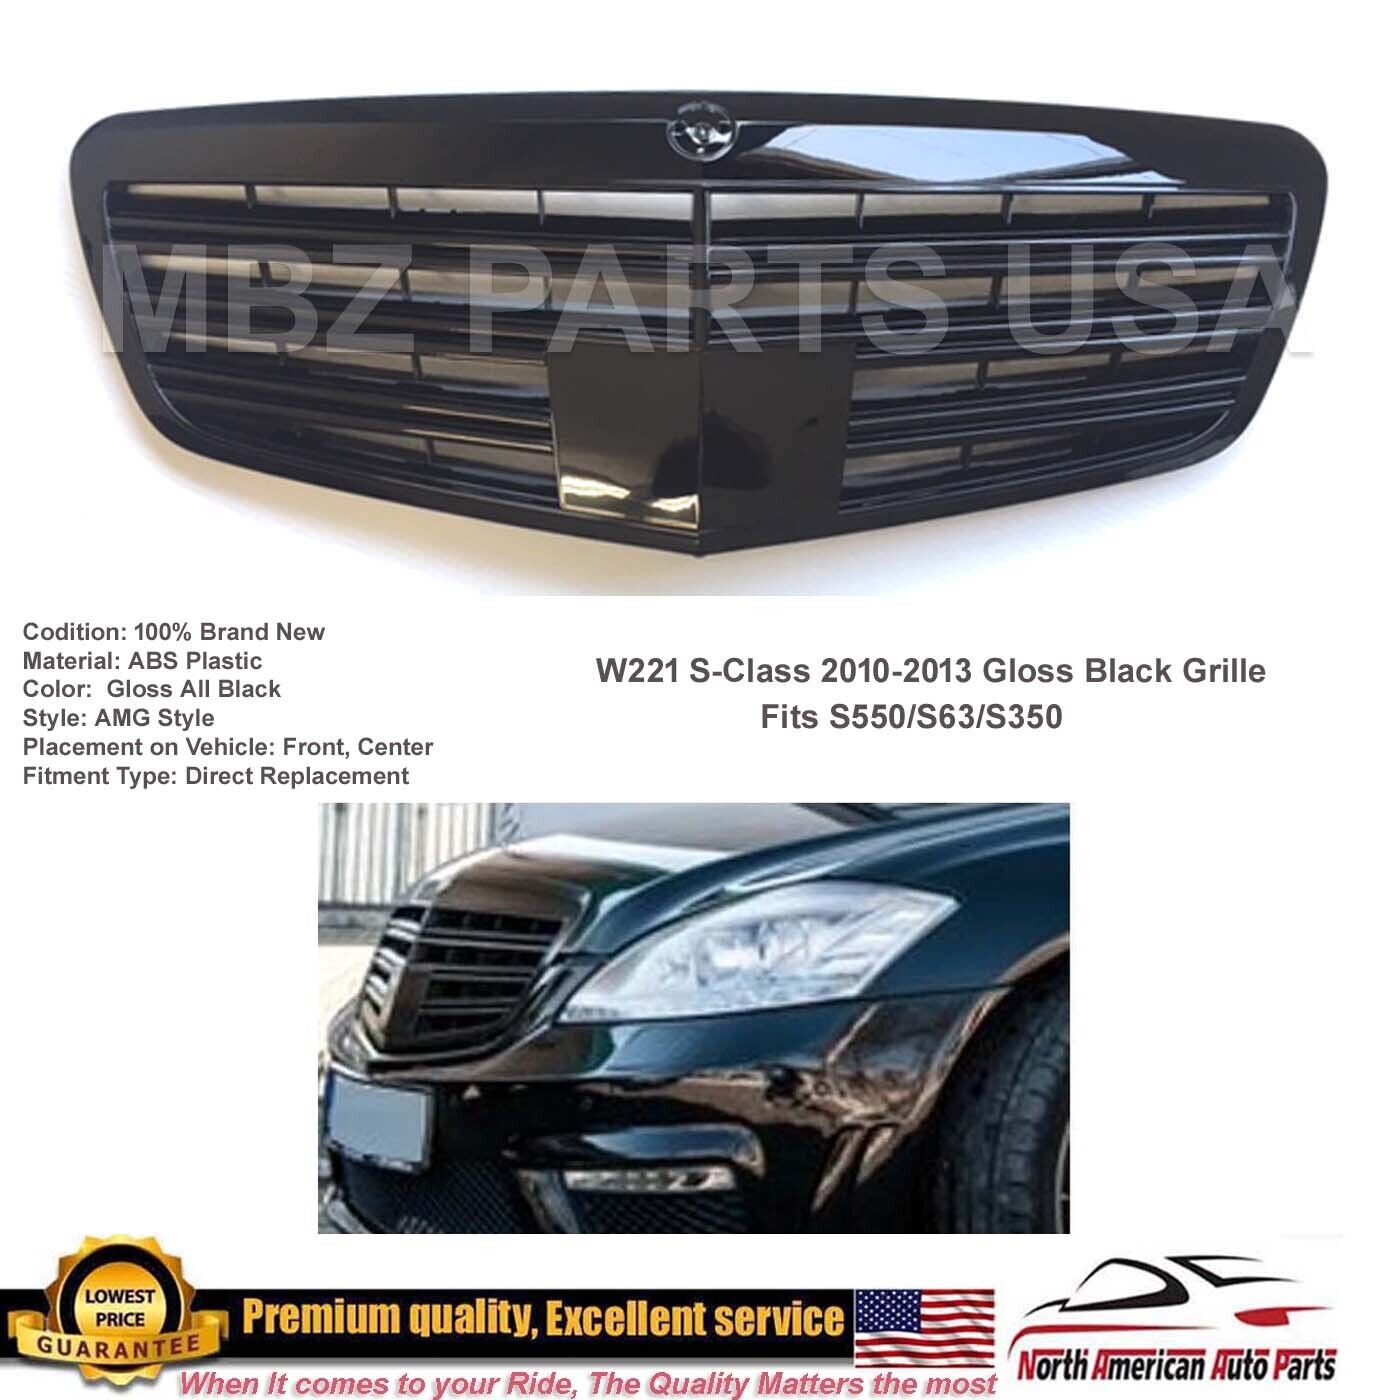 S550 S63 S450 S-Class All Black Grille 2010 2011 2012 2013 Luxury Glossy New S65